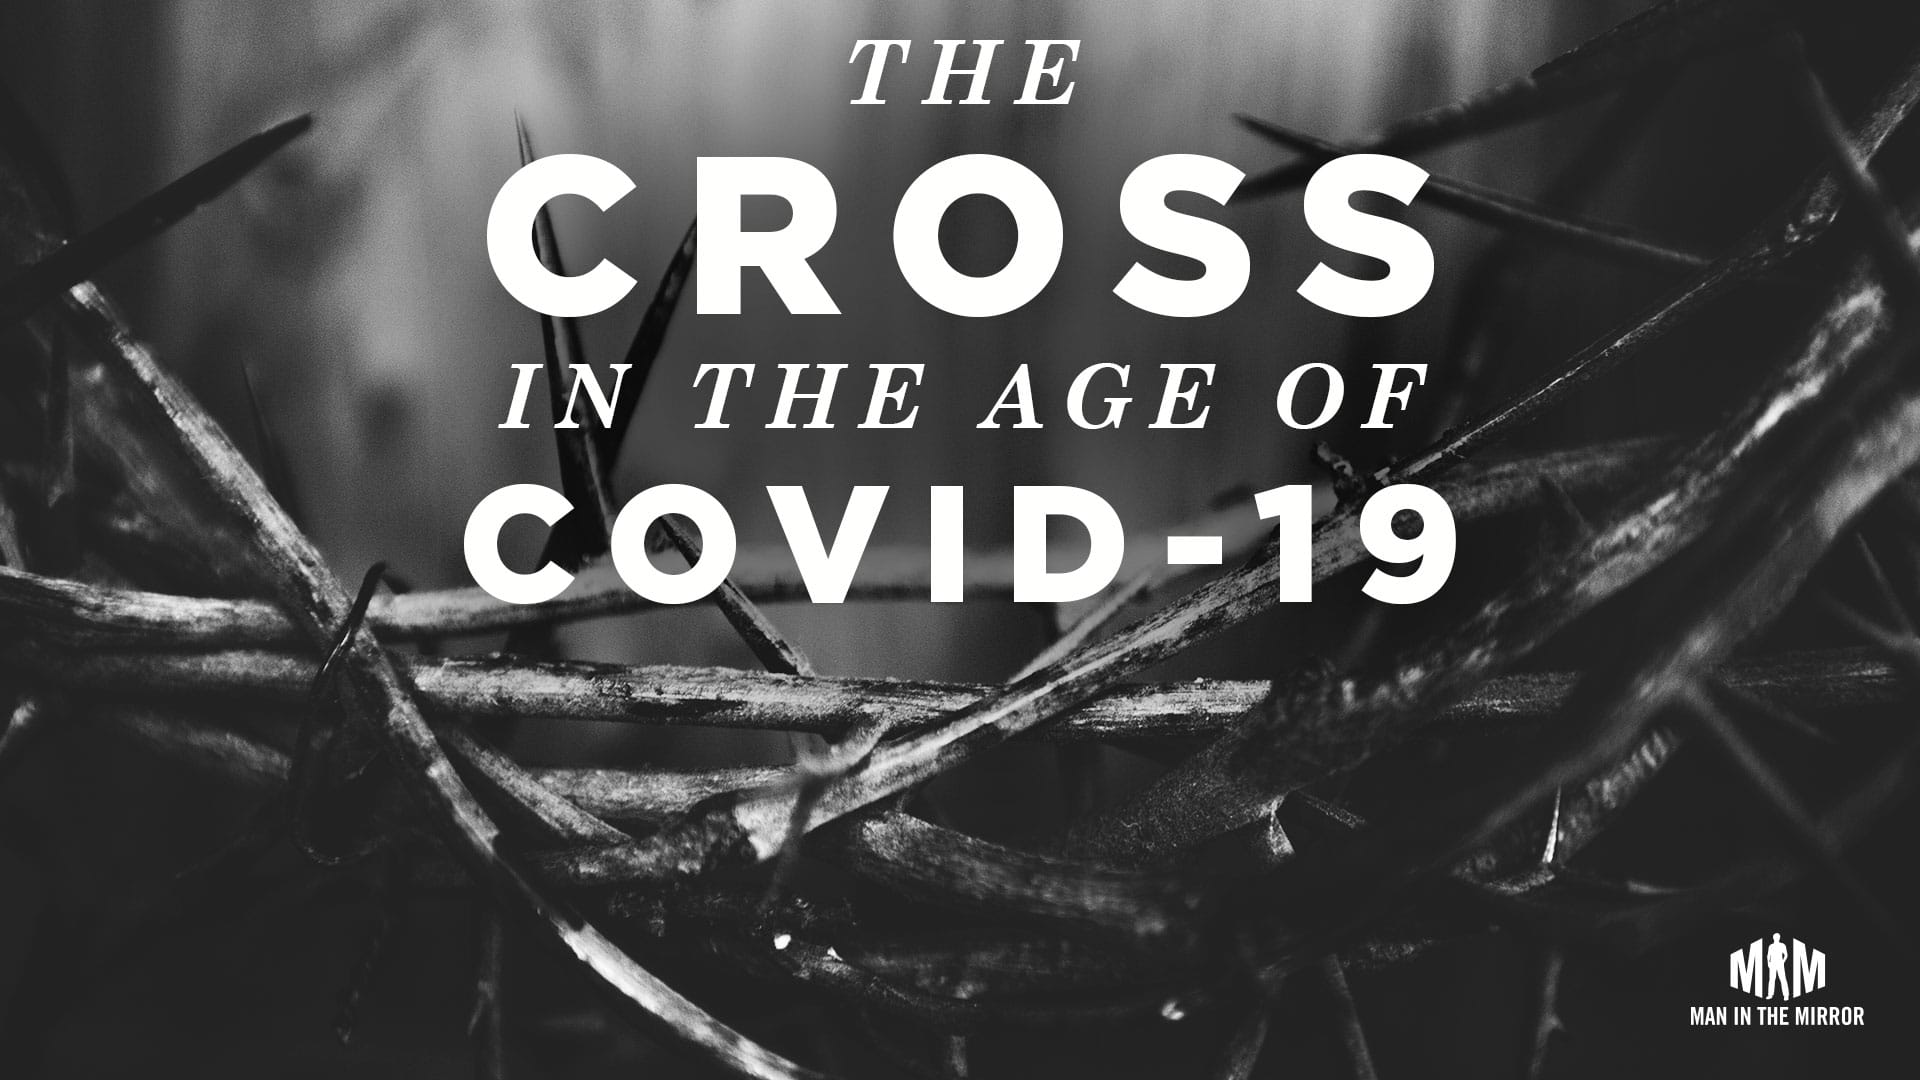 God’s wrath did not create COVID-19, but it will consume it, along with cancer, addiction, depression, and every other thing that ails us. And we know this because the victory was already won, on the cross.